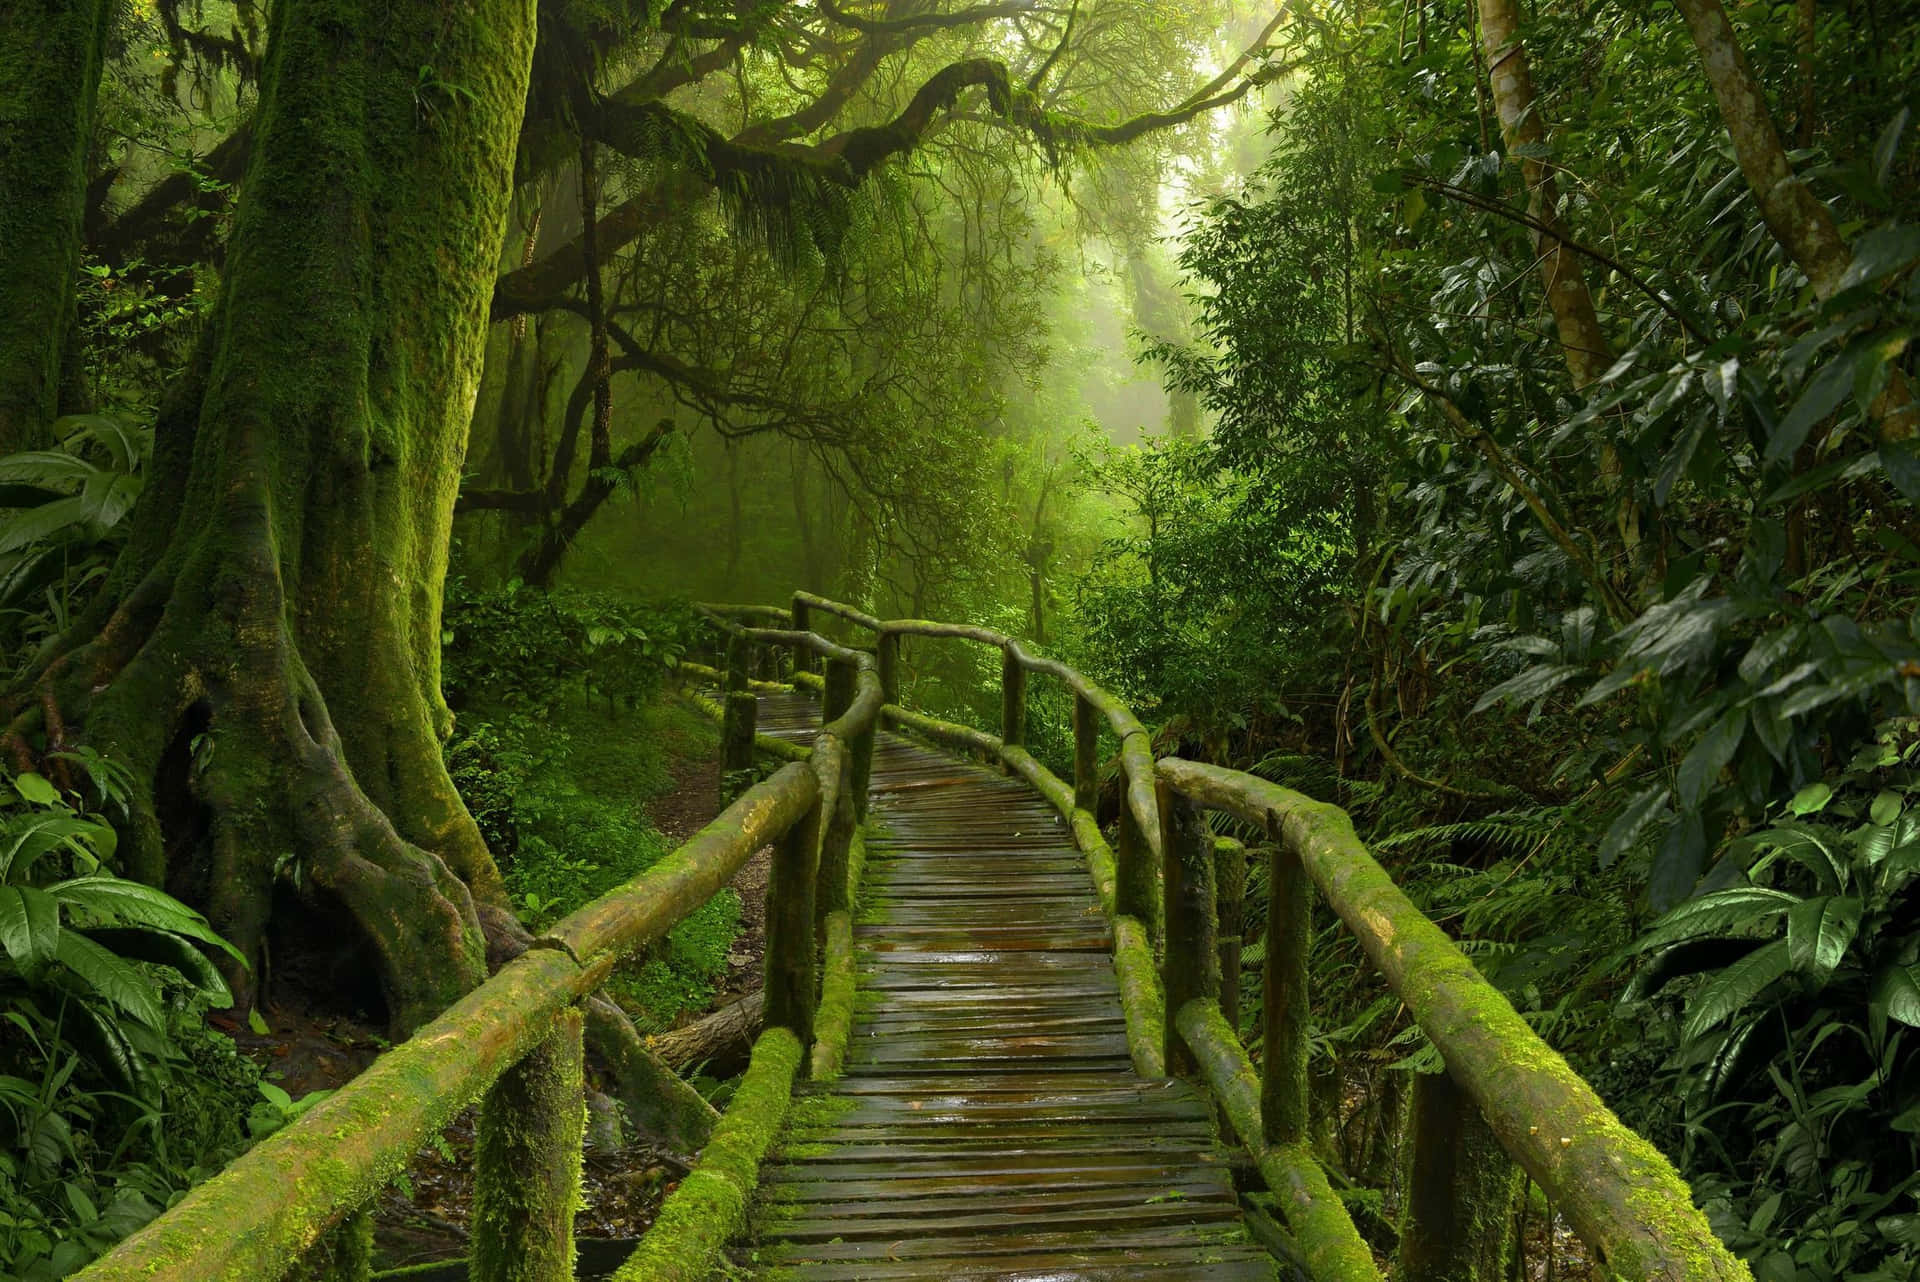 A Wooden Walkway In The Jungle